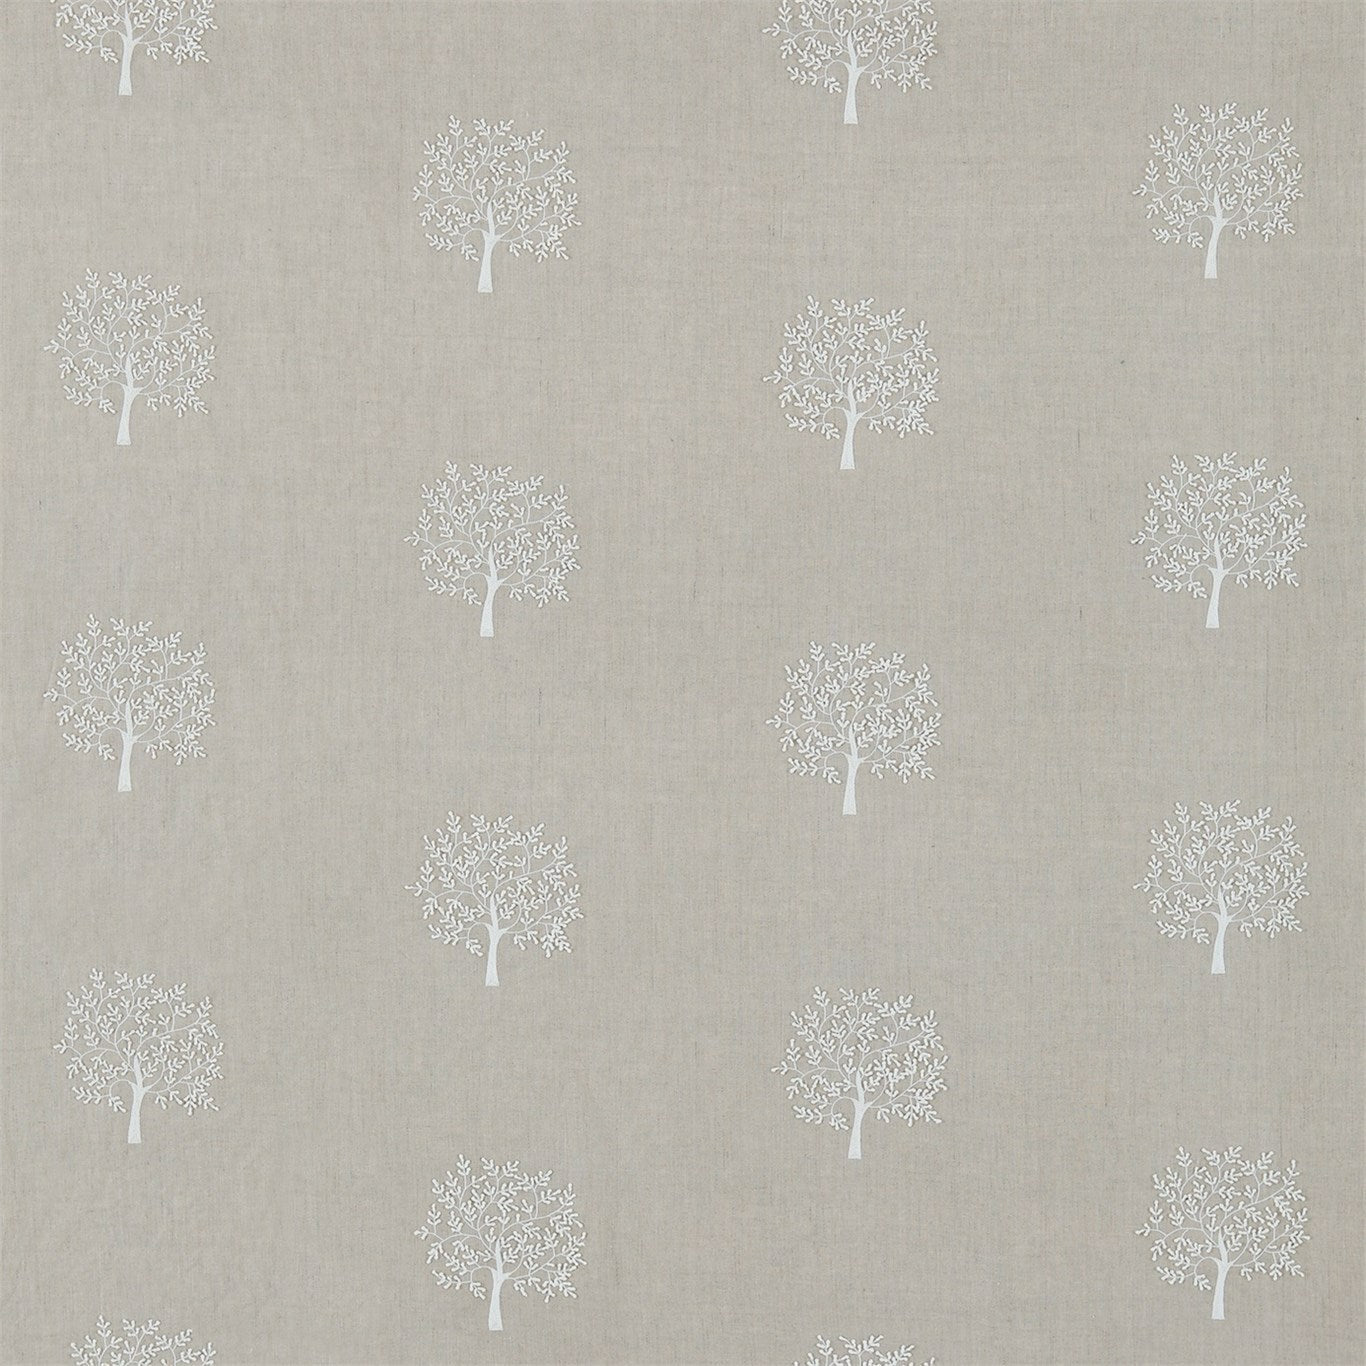 Woodland Tree Fabric by Morris & Co.